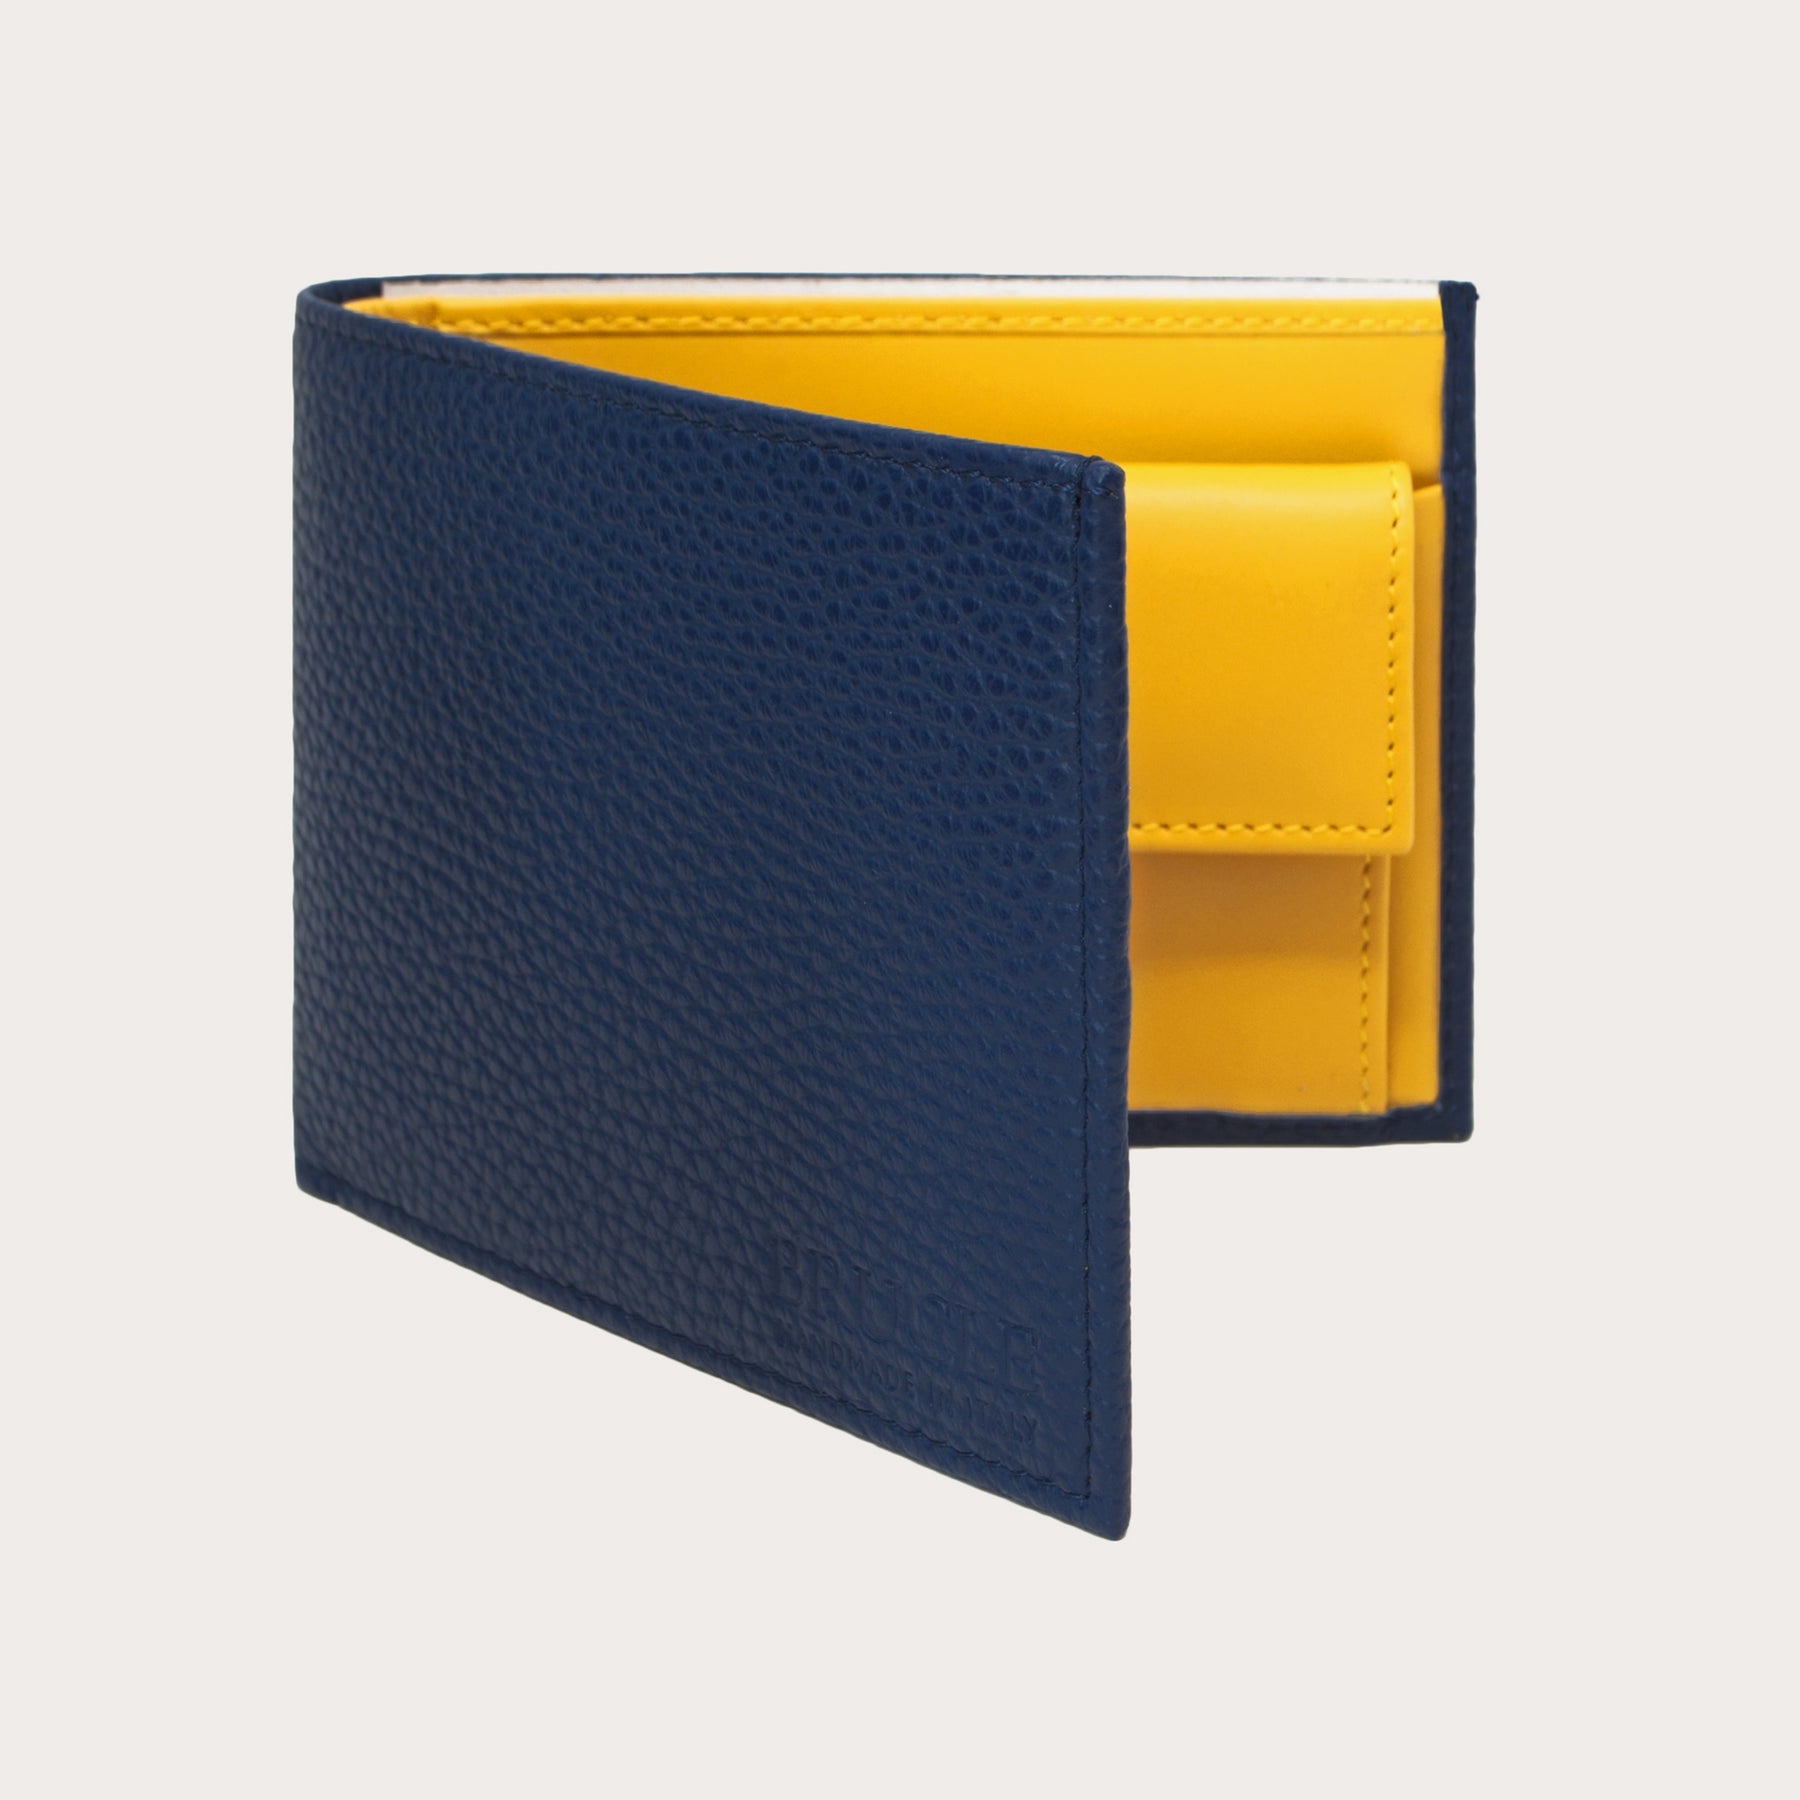 Blue men's wallet with coin purse and yellow interior